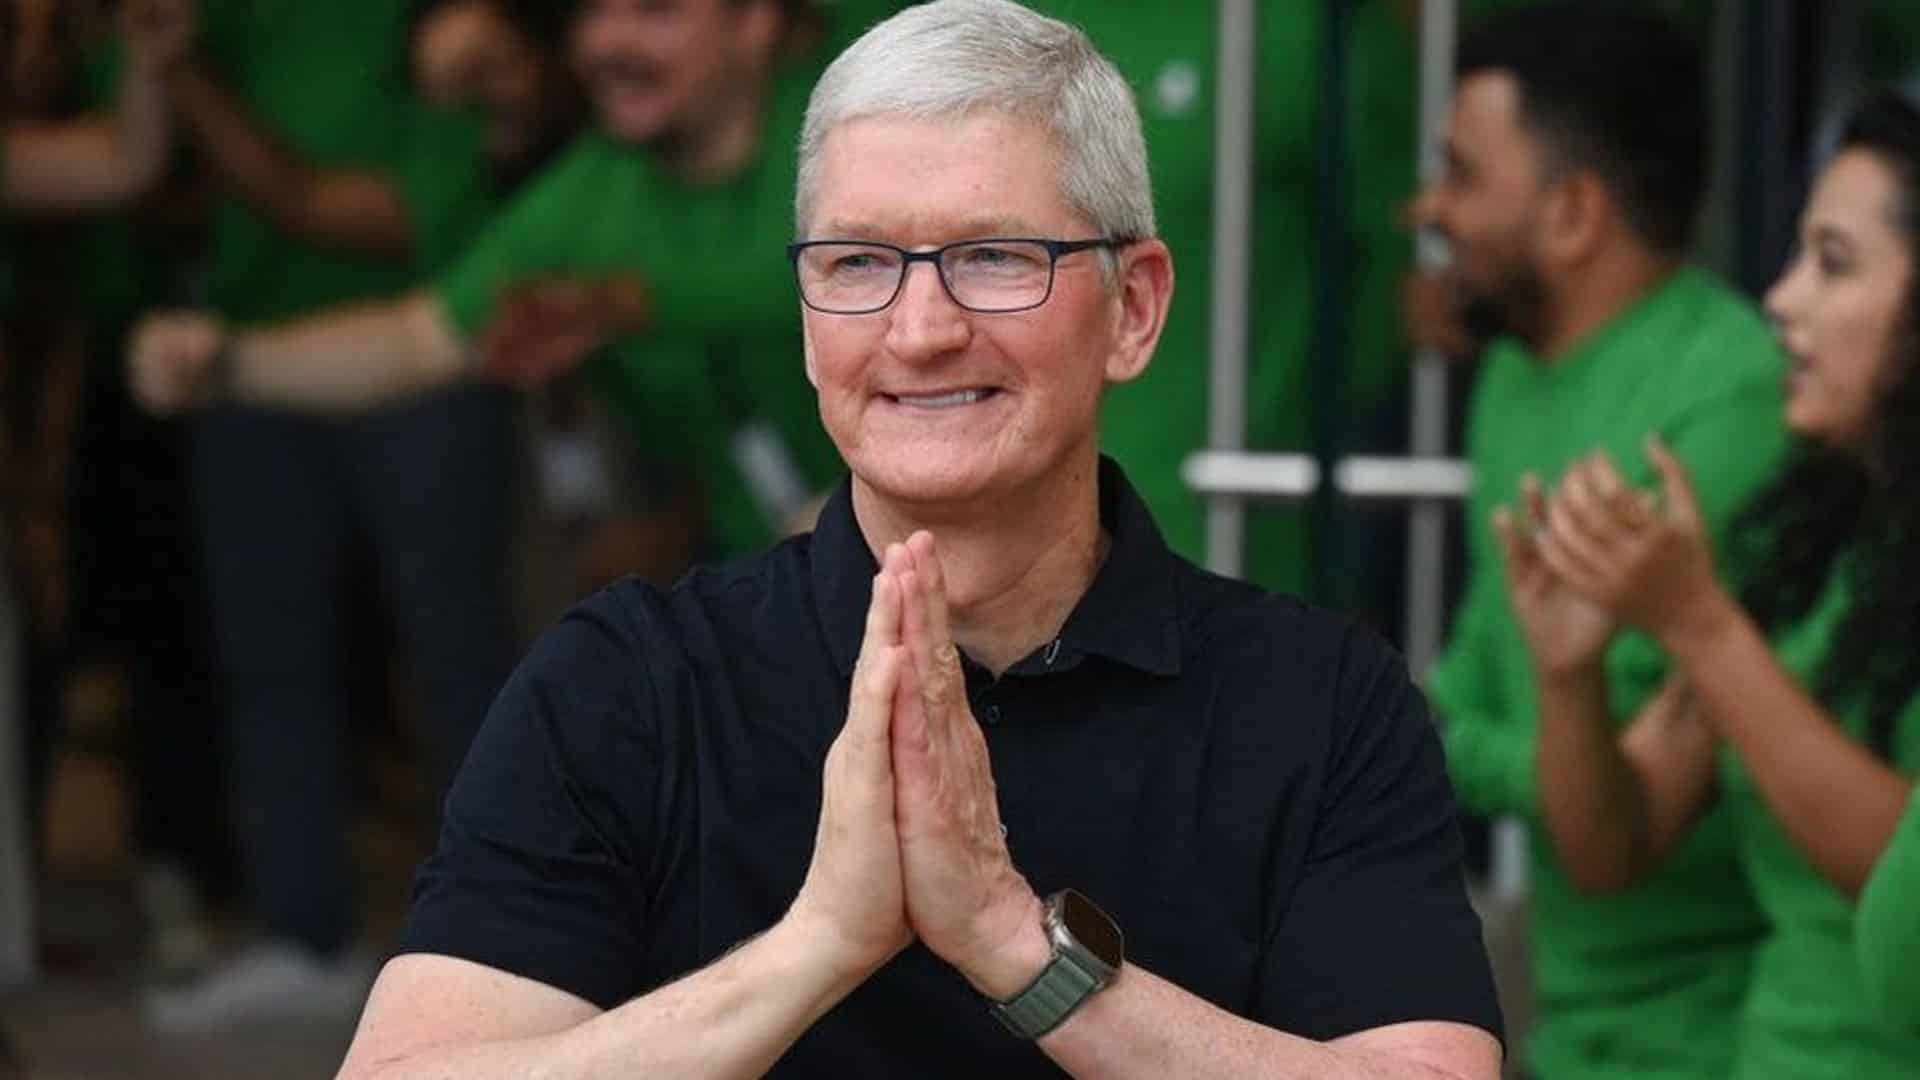 Apple CEO Tim Cook to welcome customers at Apple Store in Delhi